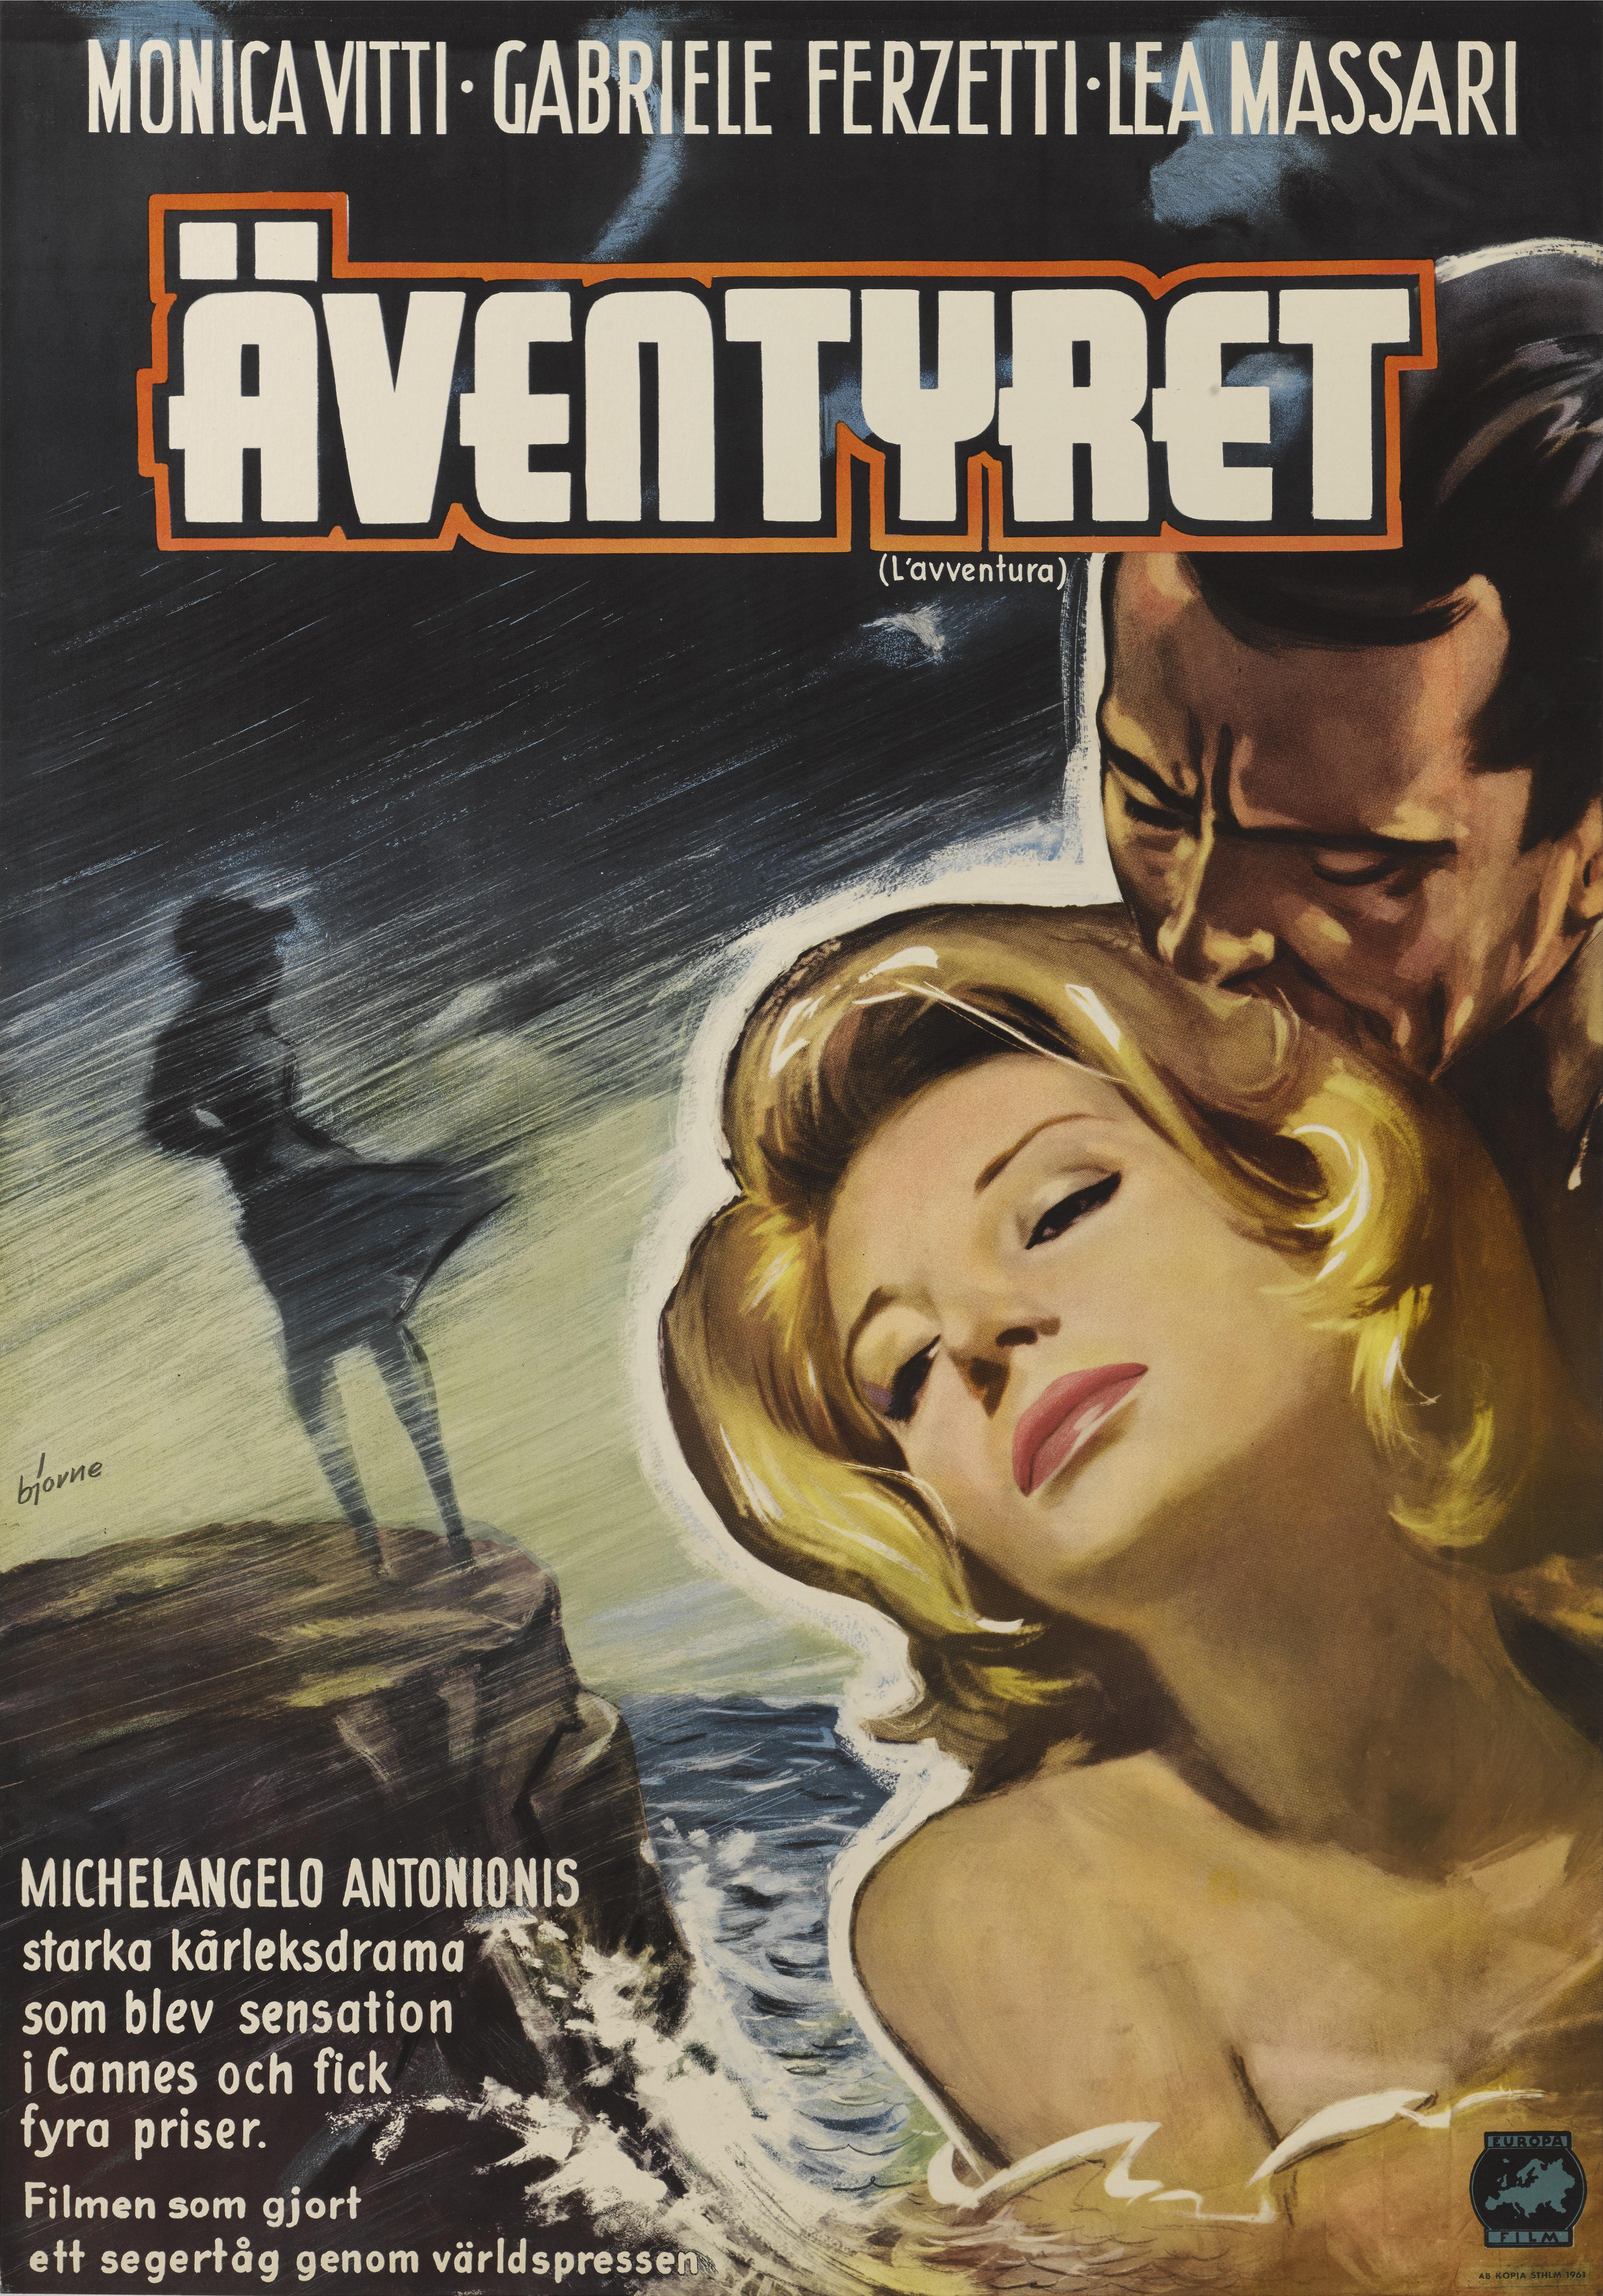 Original Swedish film poster for the 1960 Italian film directed by Michaelangelo Antonioni and stars Monica Vitti, Gabriele Ferzetti. This poster is in excellent condition and unfolded and conservation linen backed it would be shipped rolled in a